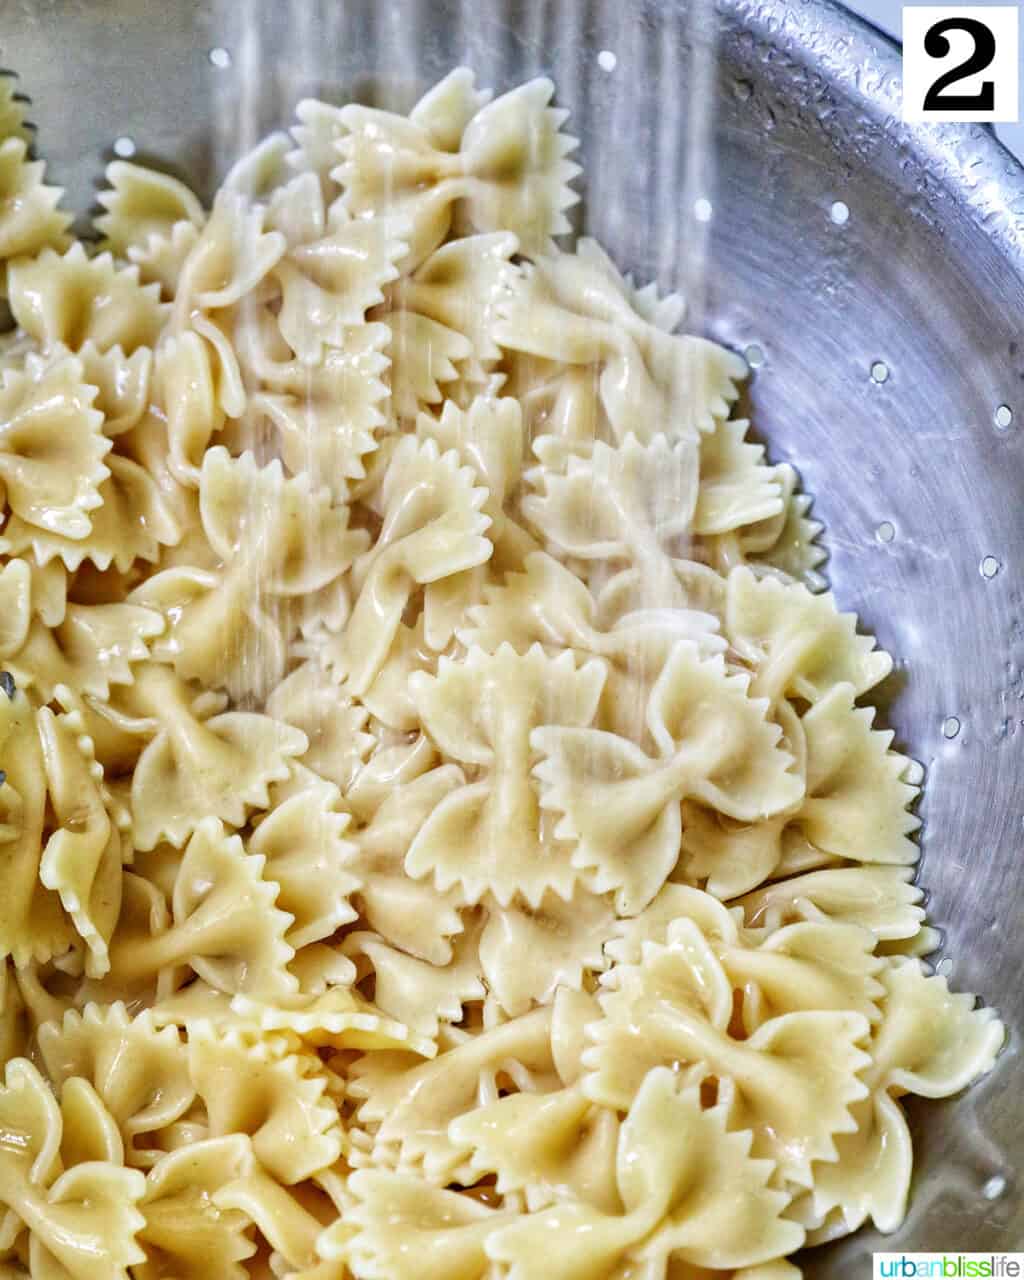 water rinsing off bowtie pasta in a collander.